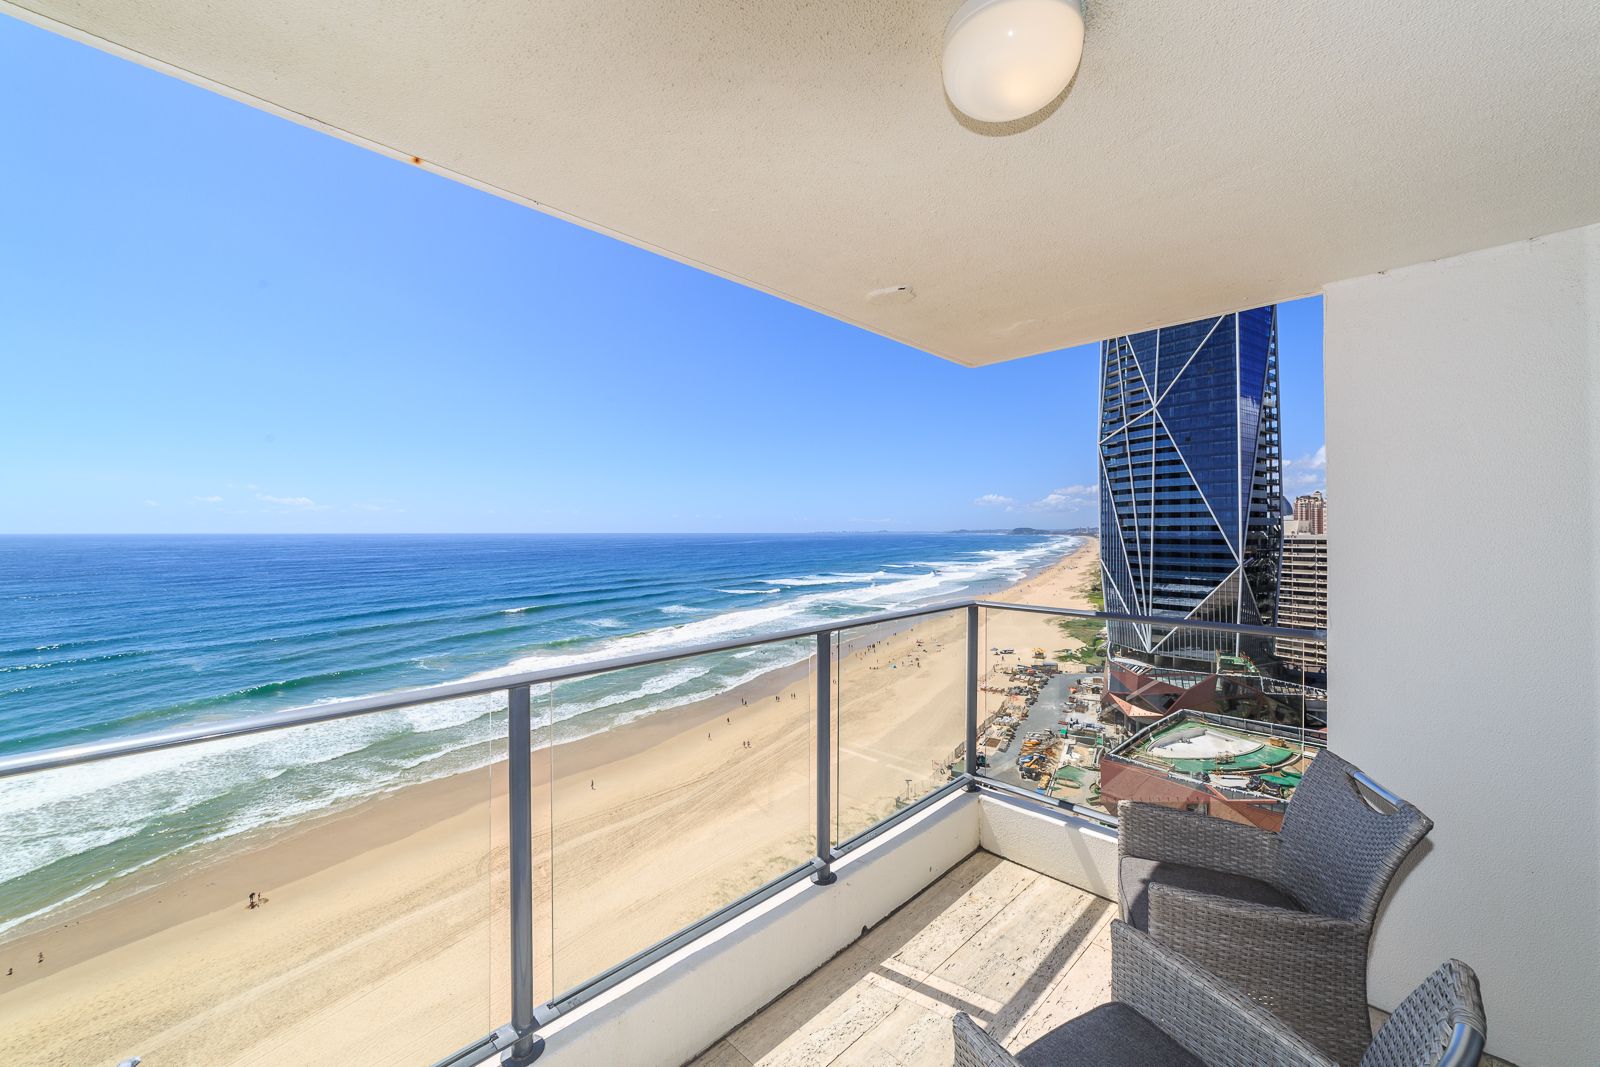 20 Old Burleigh Road, Surfers Paradise QLD 4217, Image 0